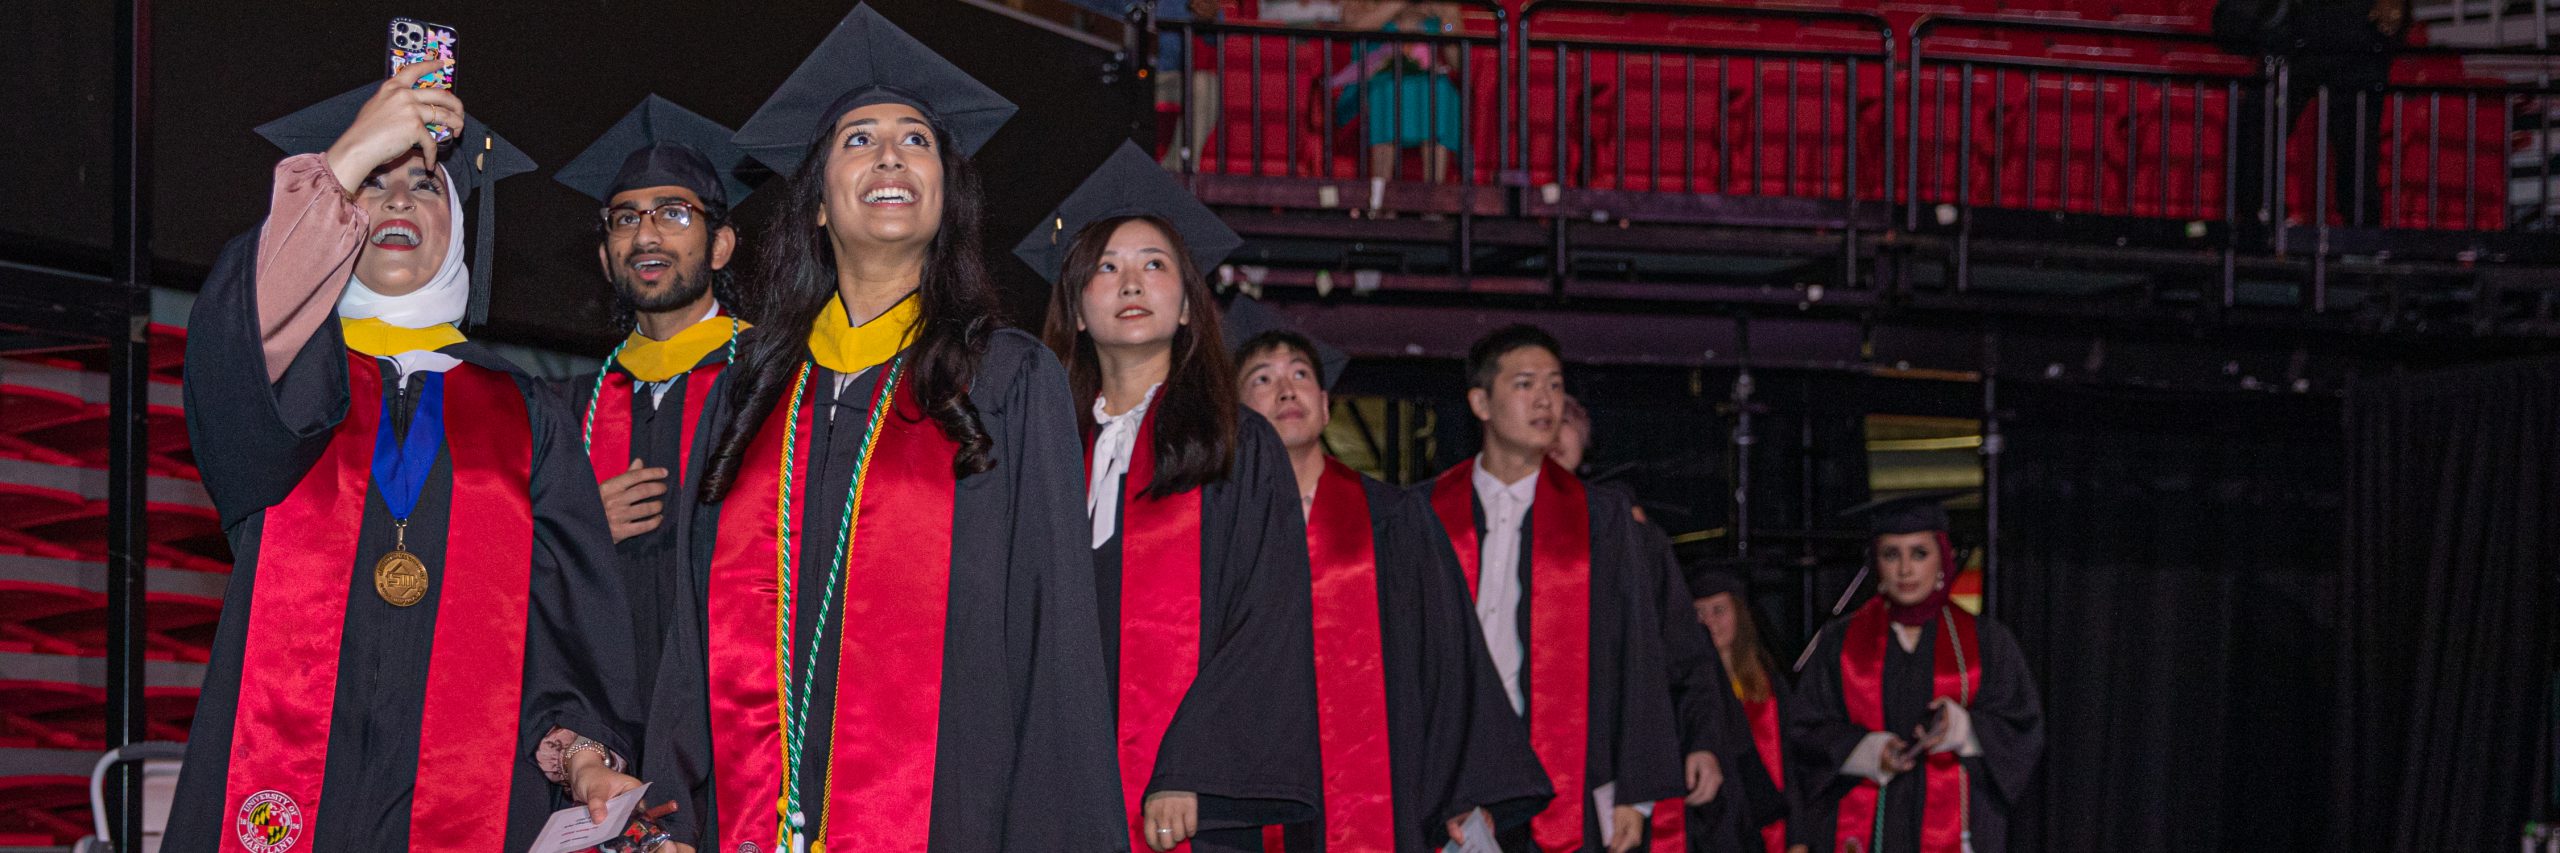 INFO Students entering Xfinity Center for Commencement